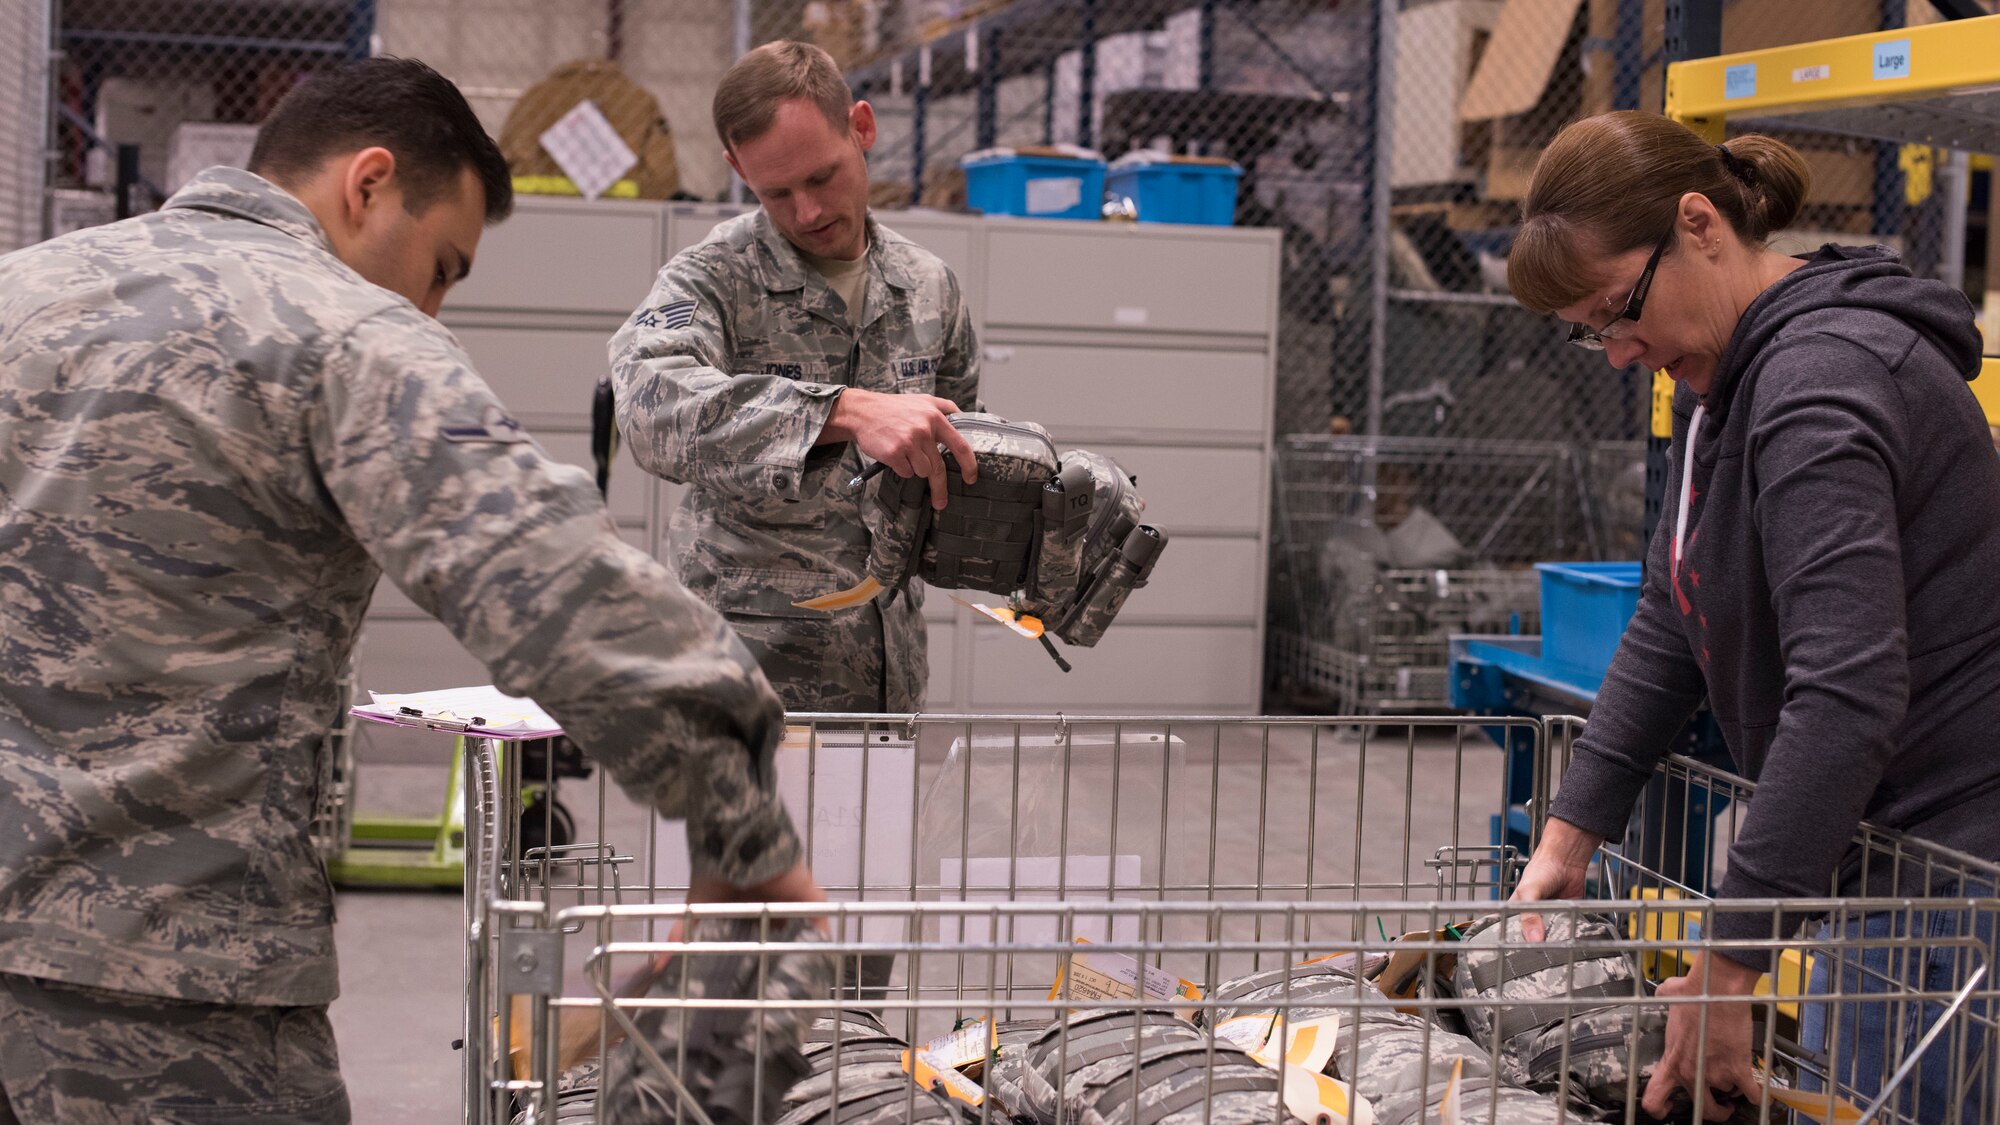 Airman Diego Najera-Dominguez, 92nd Logistics Readiness Squadron Individual Protective Equipment apprentice (left), Staff Sgt. Jeffery Jones, 92nd LRS Individual Protective Equipment supervisor, and Jessica Parker, 92nd LRS IPE Supply Technician supervisor, sort through Joint First Aid Kit packages Sept. 19, 2018, at Fairchild Air Force Base, Washington. Logistics Airmen are tasked with the organization, tracking and issuing of hundreds of thousands of individual pieces of gear for training and deployment purposes. (U.S. Air Force photo/Senior Airman Ryan Lackey)